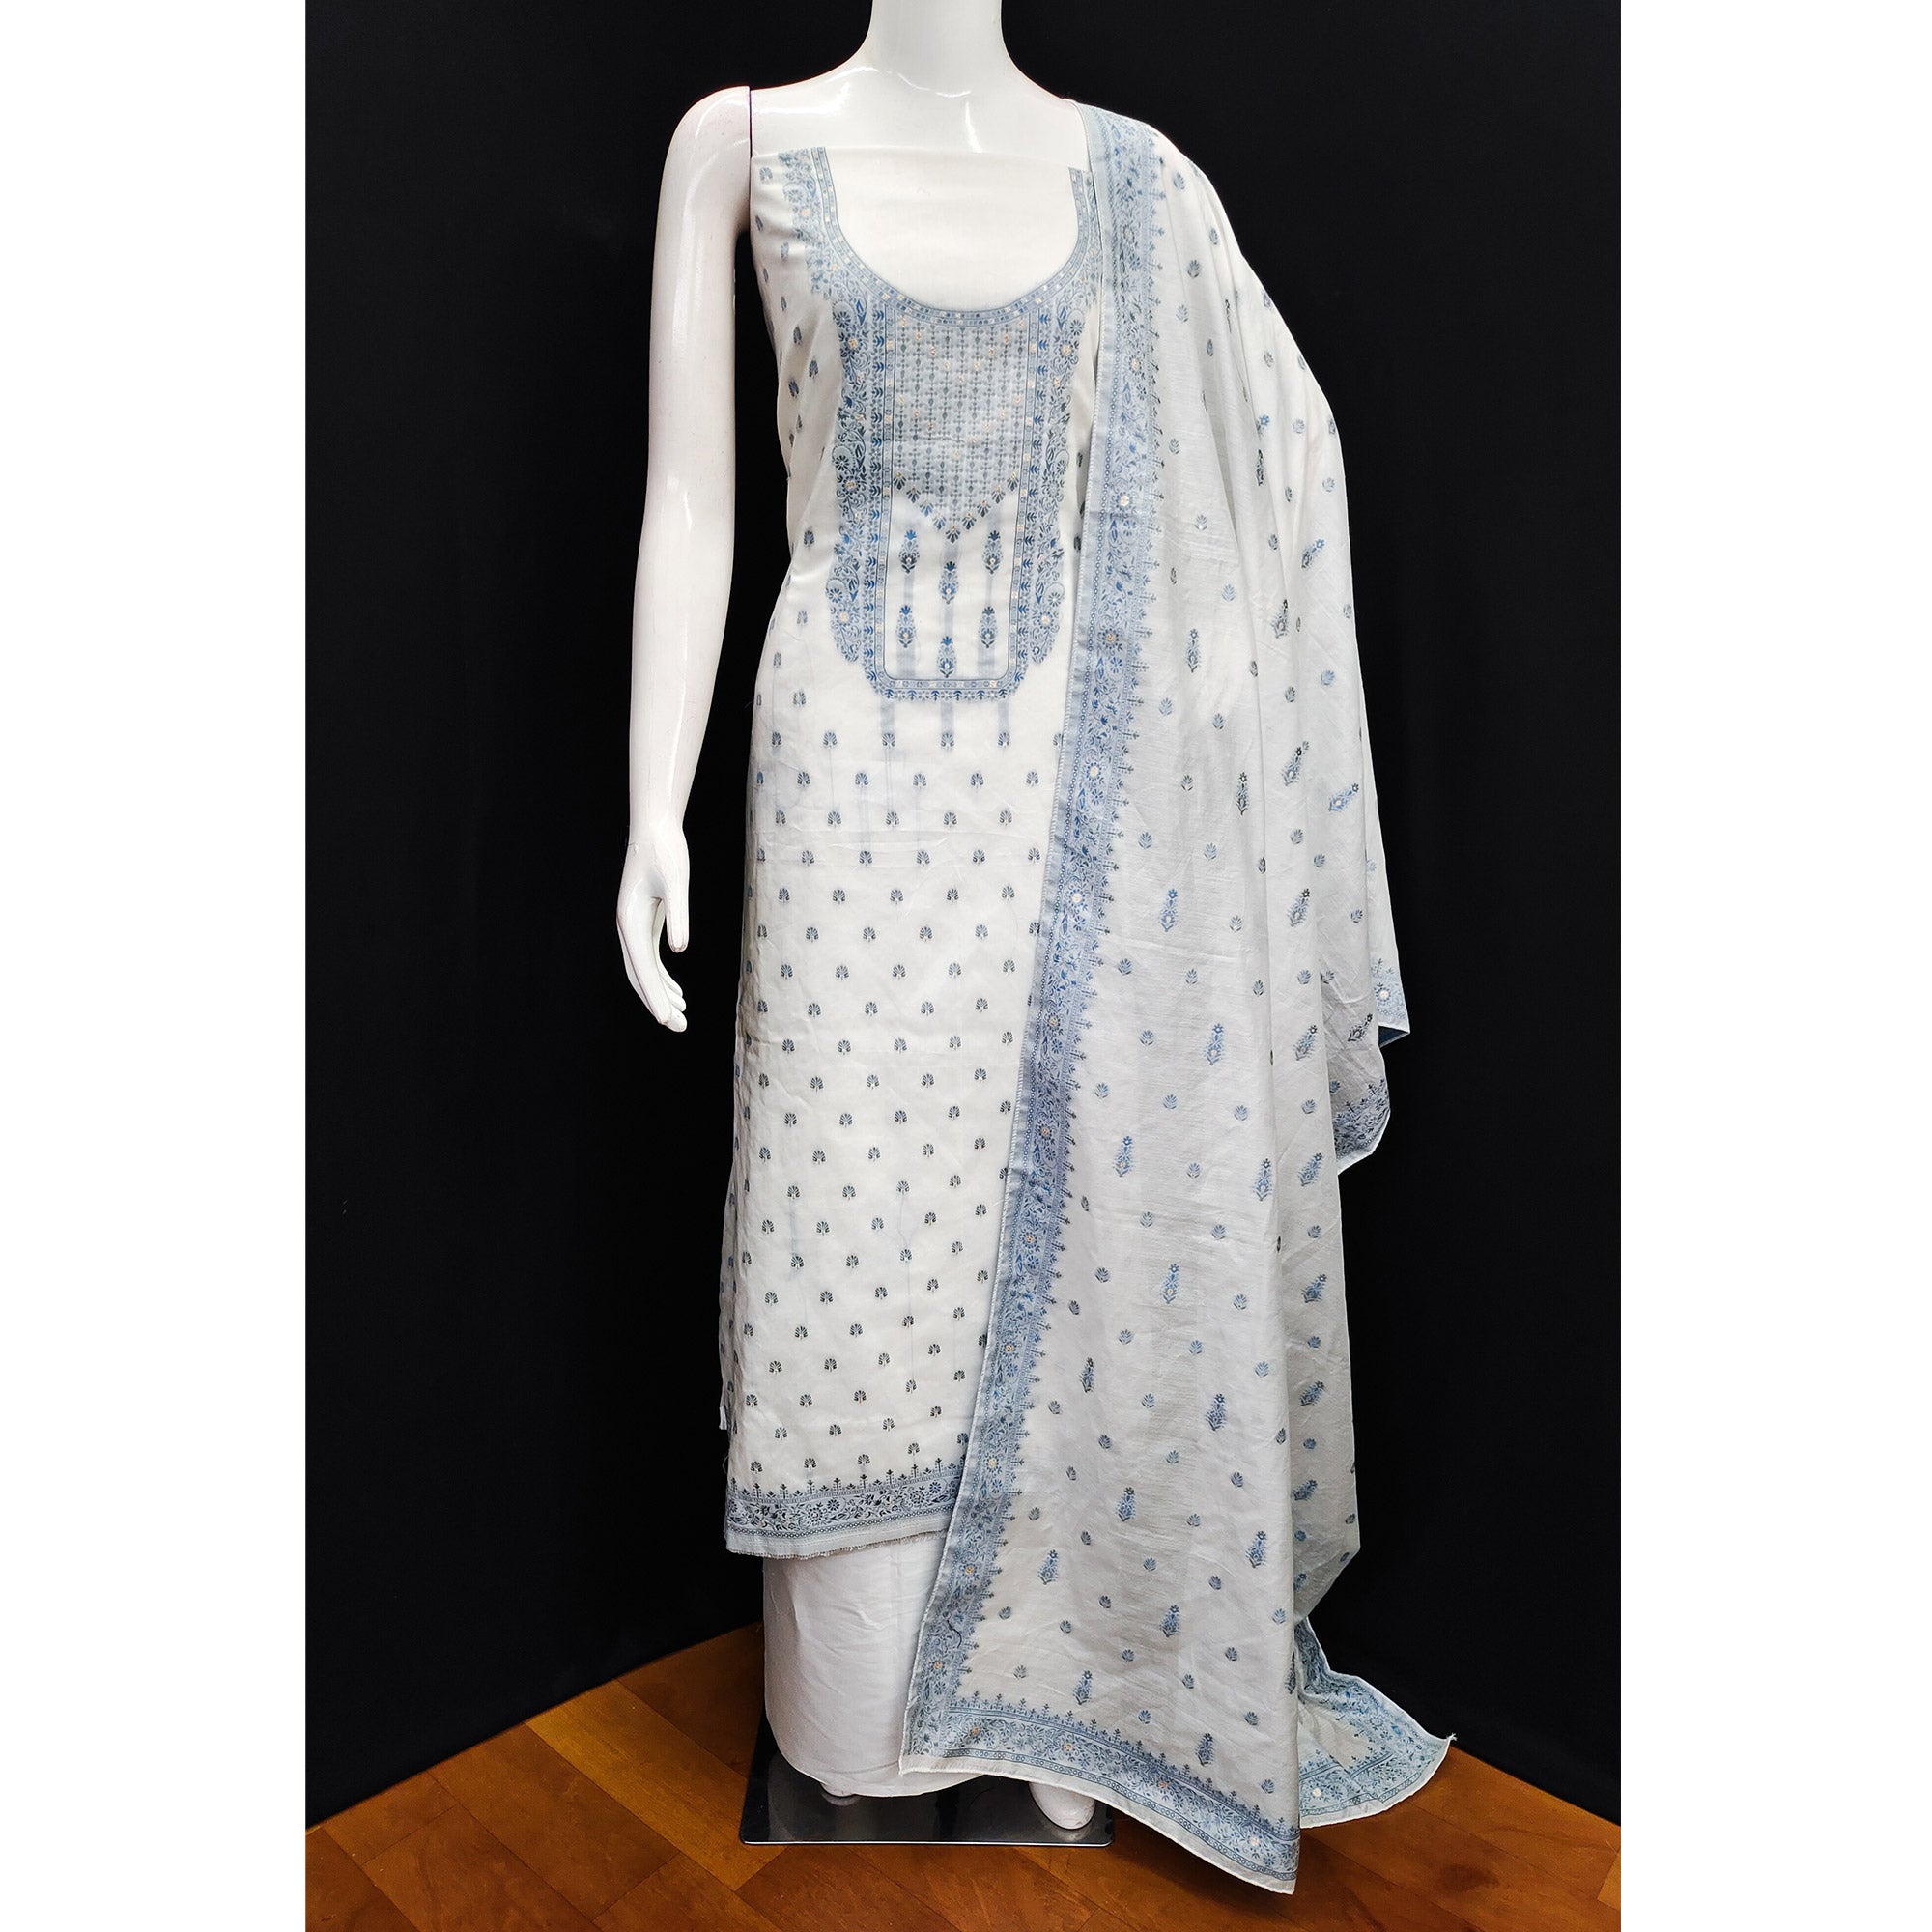 White & Blue Floral Woven Muslin Dress Material